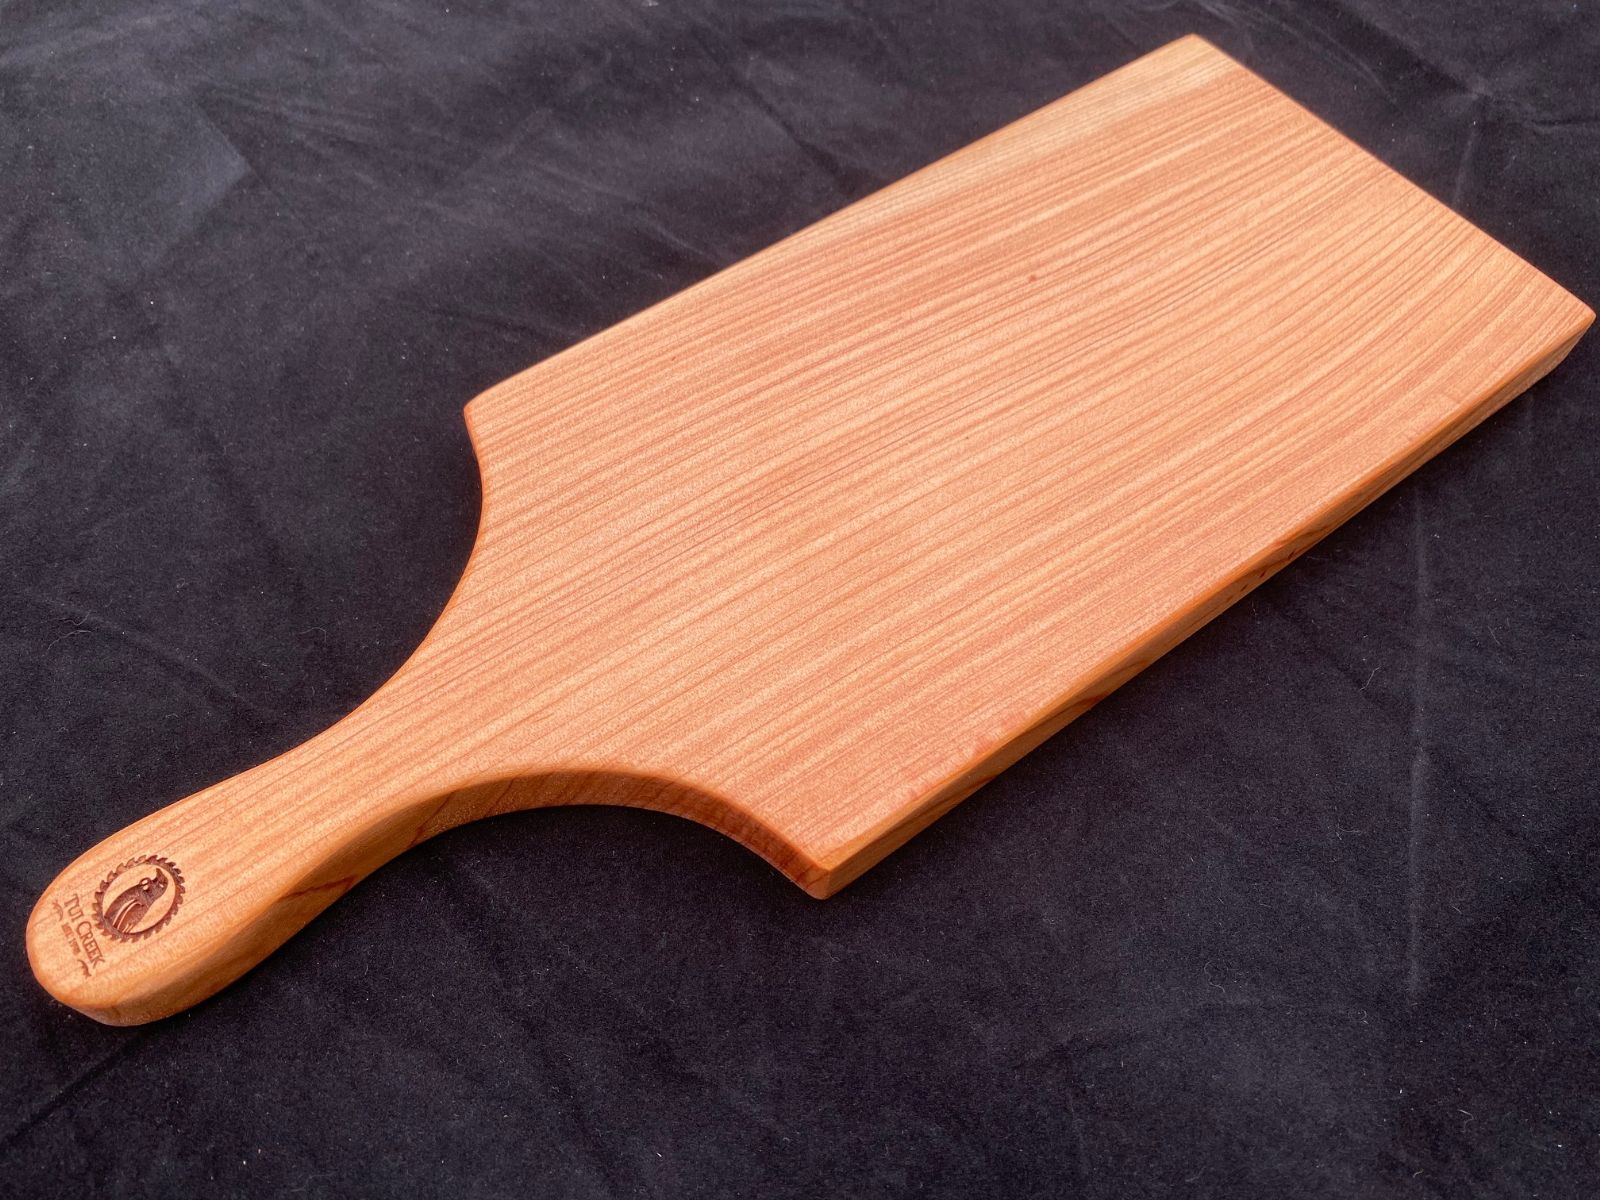 MACROCARPA CHEESE / SERVING BOARD: Small clear